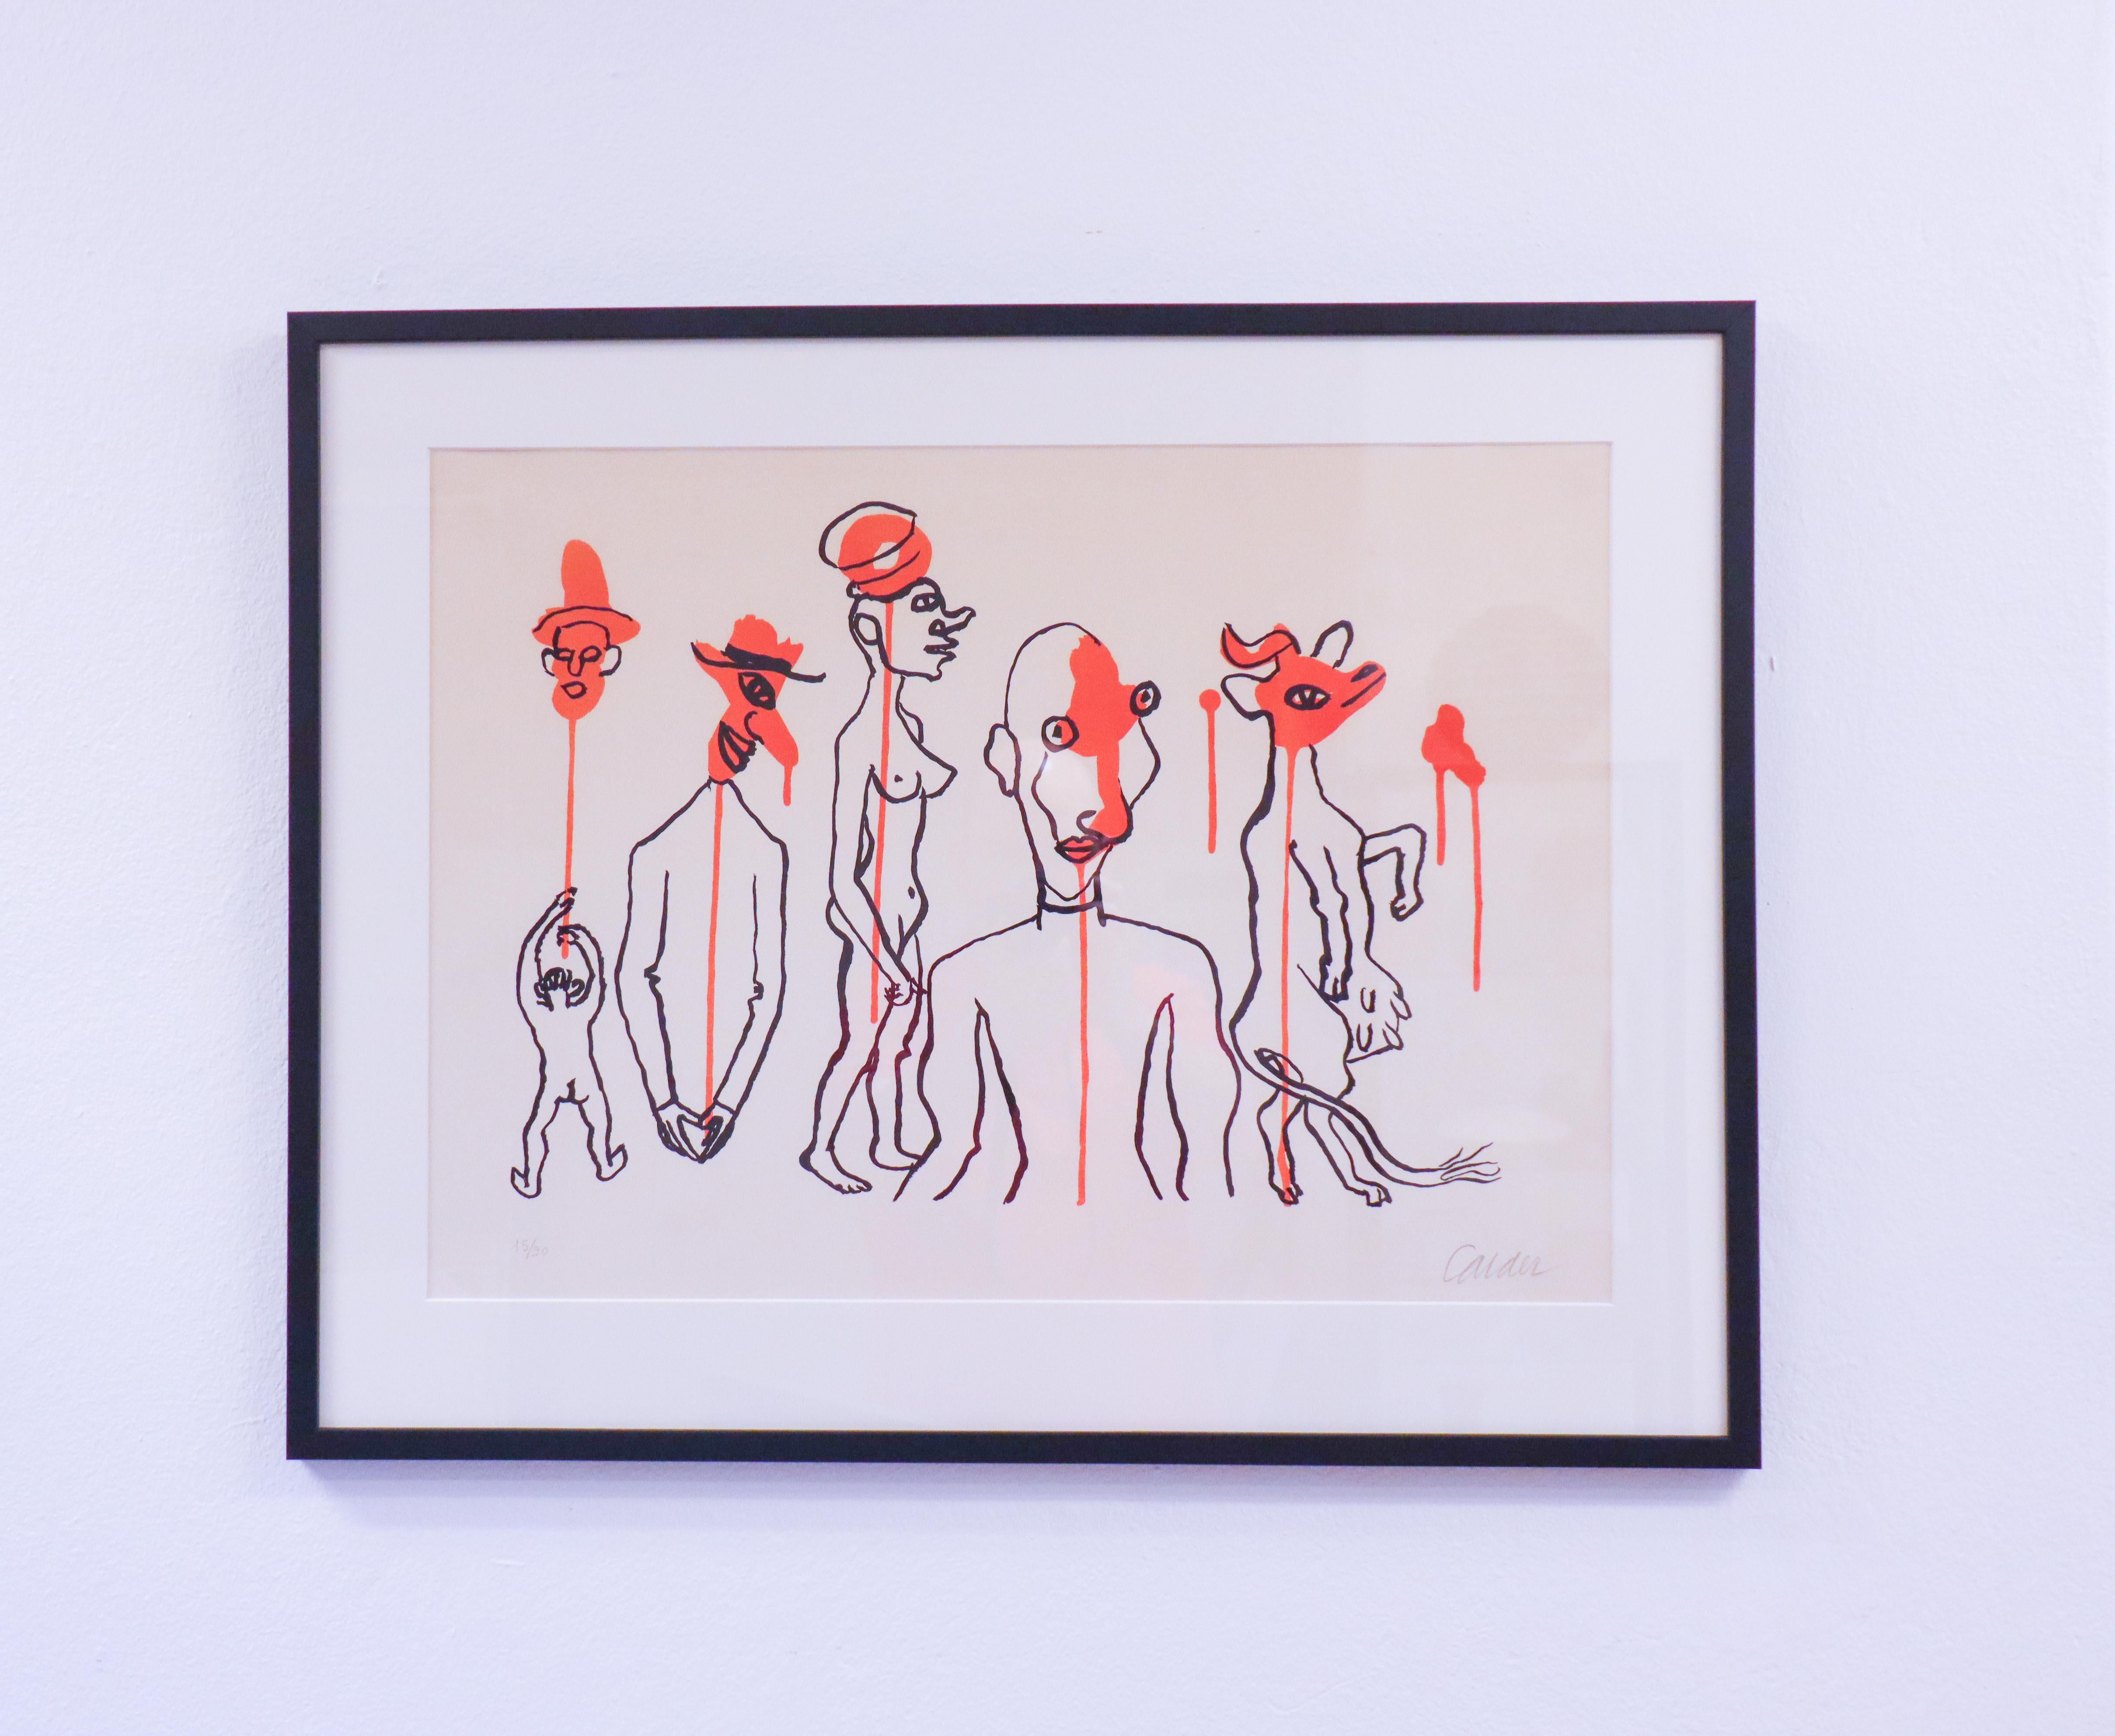 A lithograph by Alexander Calder namned Les Queles Deqoulinantes. This is number 15 in an edition of 90. It is 76 x 59 cm (framed), 61 x 44 cm (picture). It is reframed but have the original sticker on the back from when it was purchased at Galerie